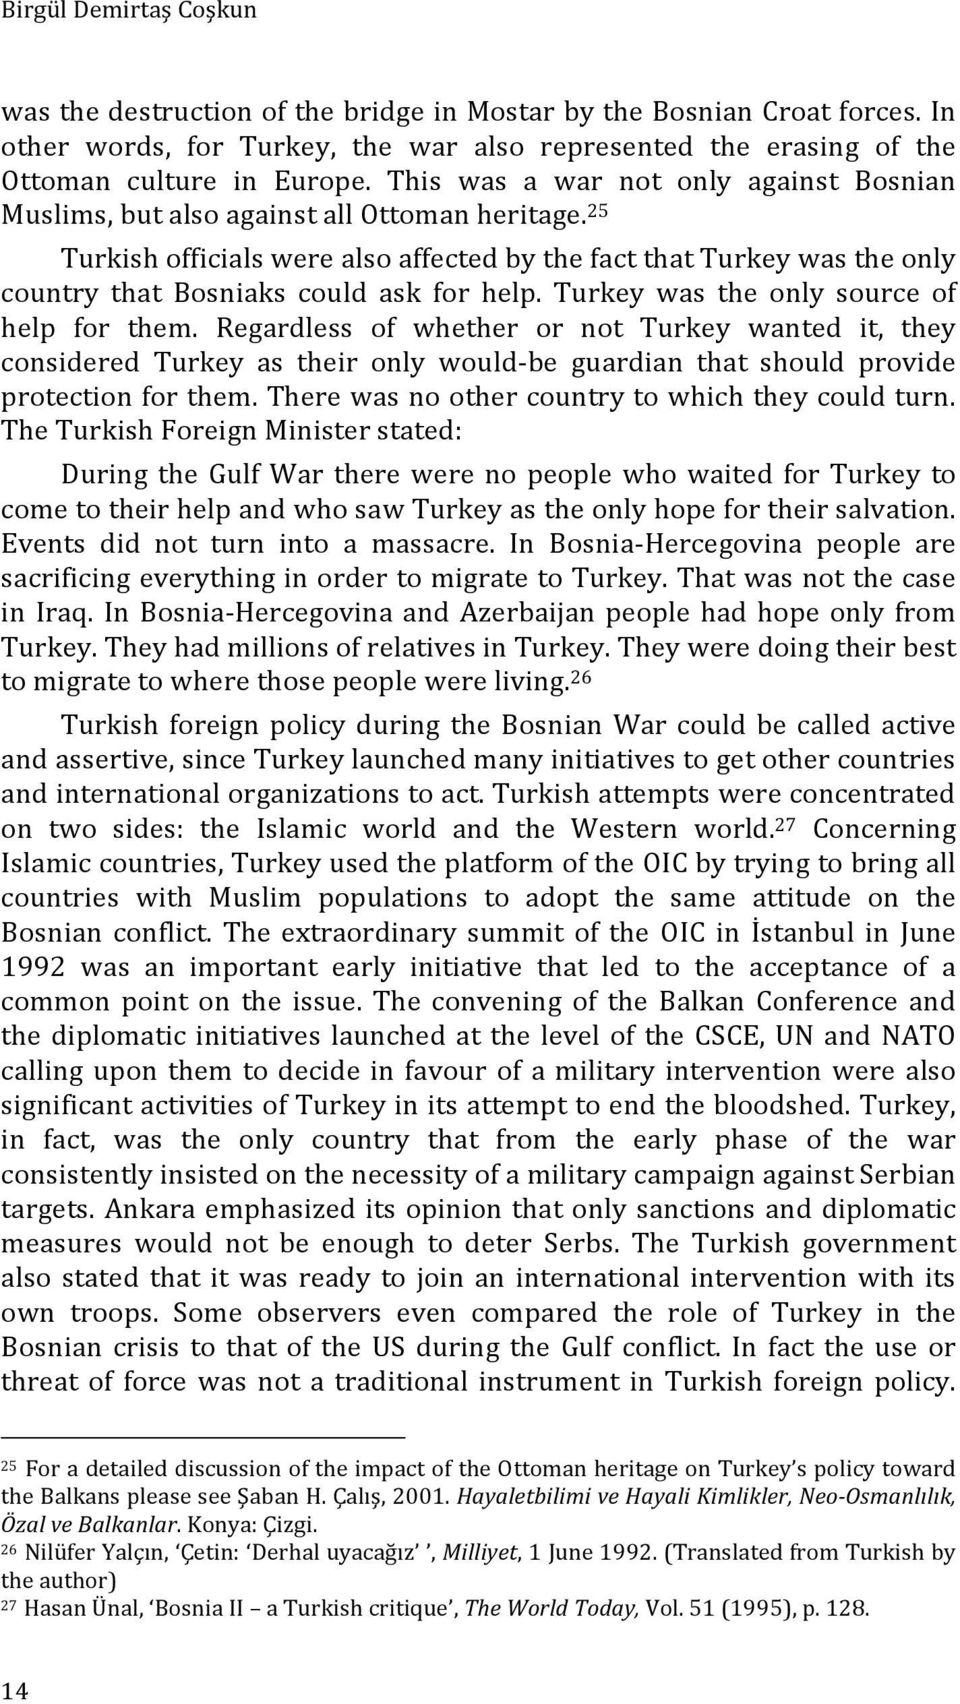 25 Turkish officials were also affected by the fact that Turkey was the only country that Bosniaks could ask for help. Turkey was the only source of help for them.